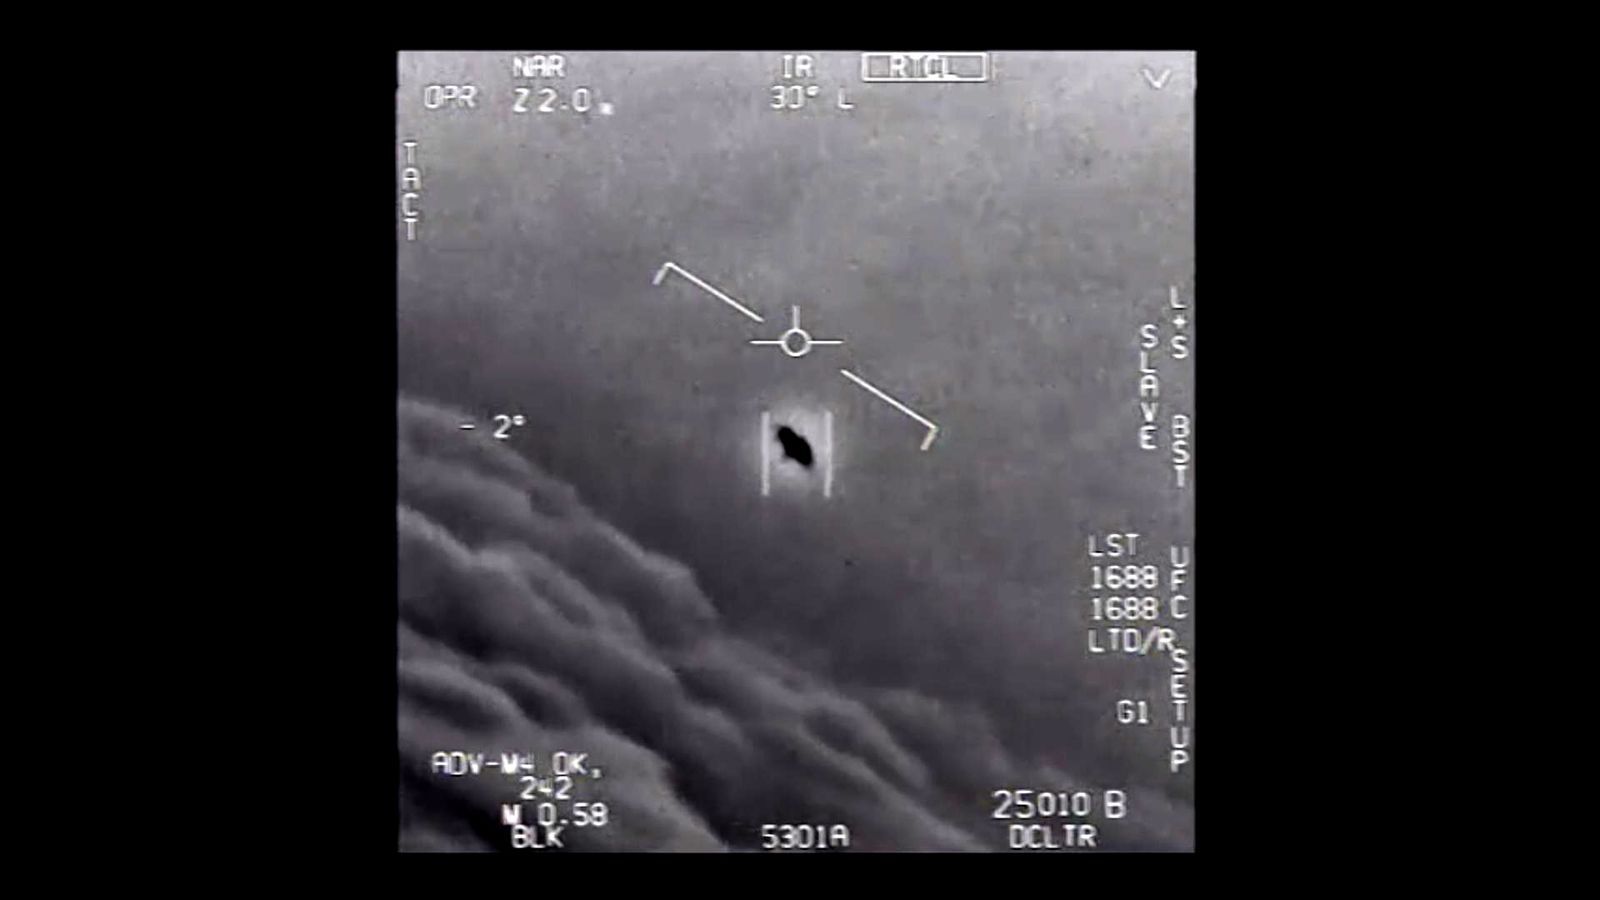 Leaked classified 'UFO footage' is real, US Navy confirms